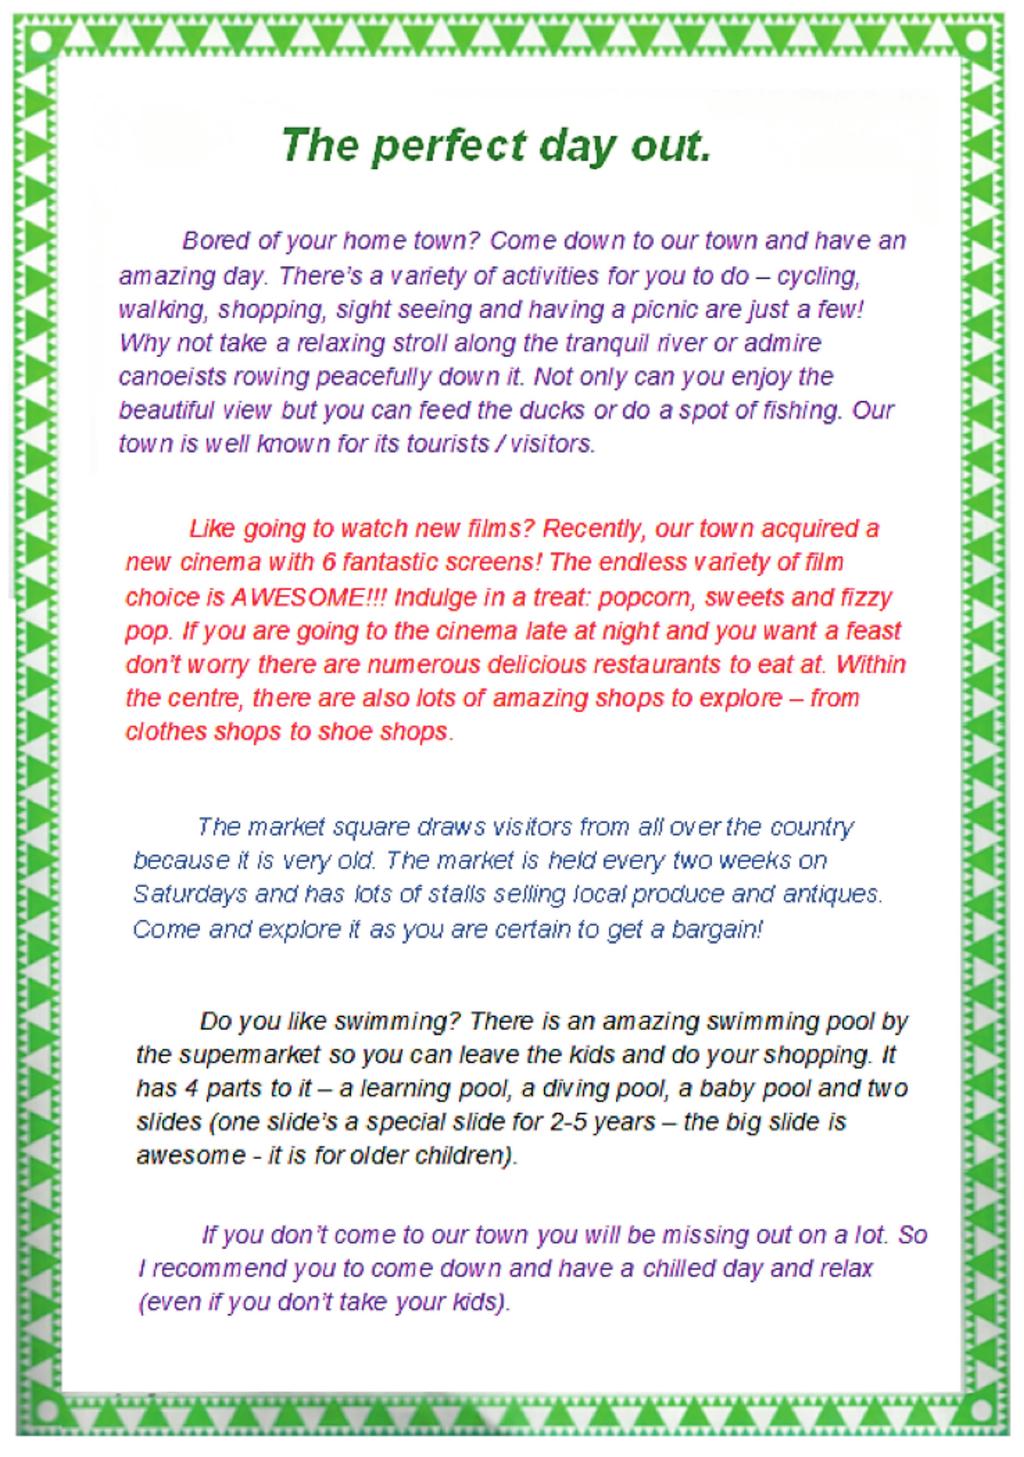 Piece F: Promotional leaflet 2016 English writing exemplifi cation 2016KS2 english writing exemplifi cation As part of a unit on different types of non-fiction writing, pupils drew on first-hand